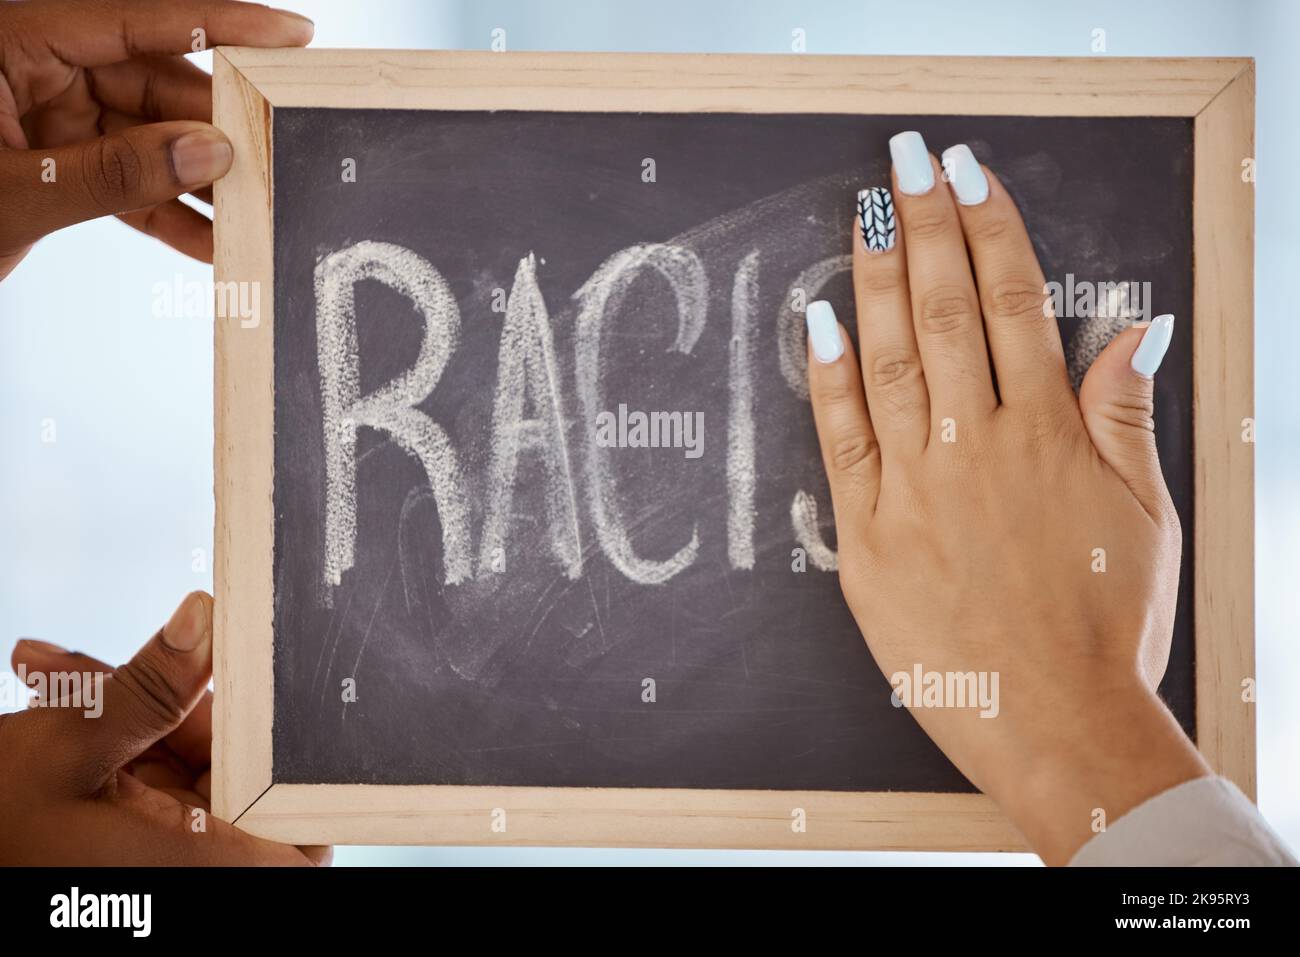 Racism, protest and stop hands on blackboard to remove inequality writing for a change in society. Race, prejudice and black lives matter group Stock Photo